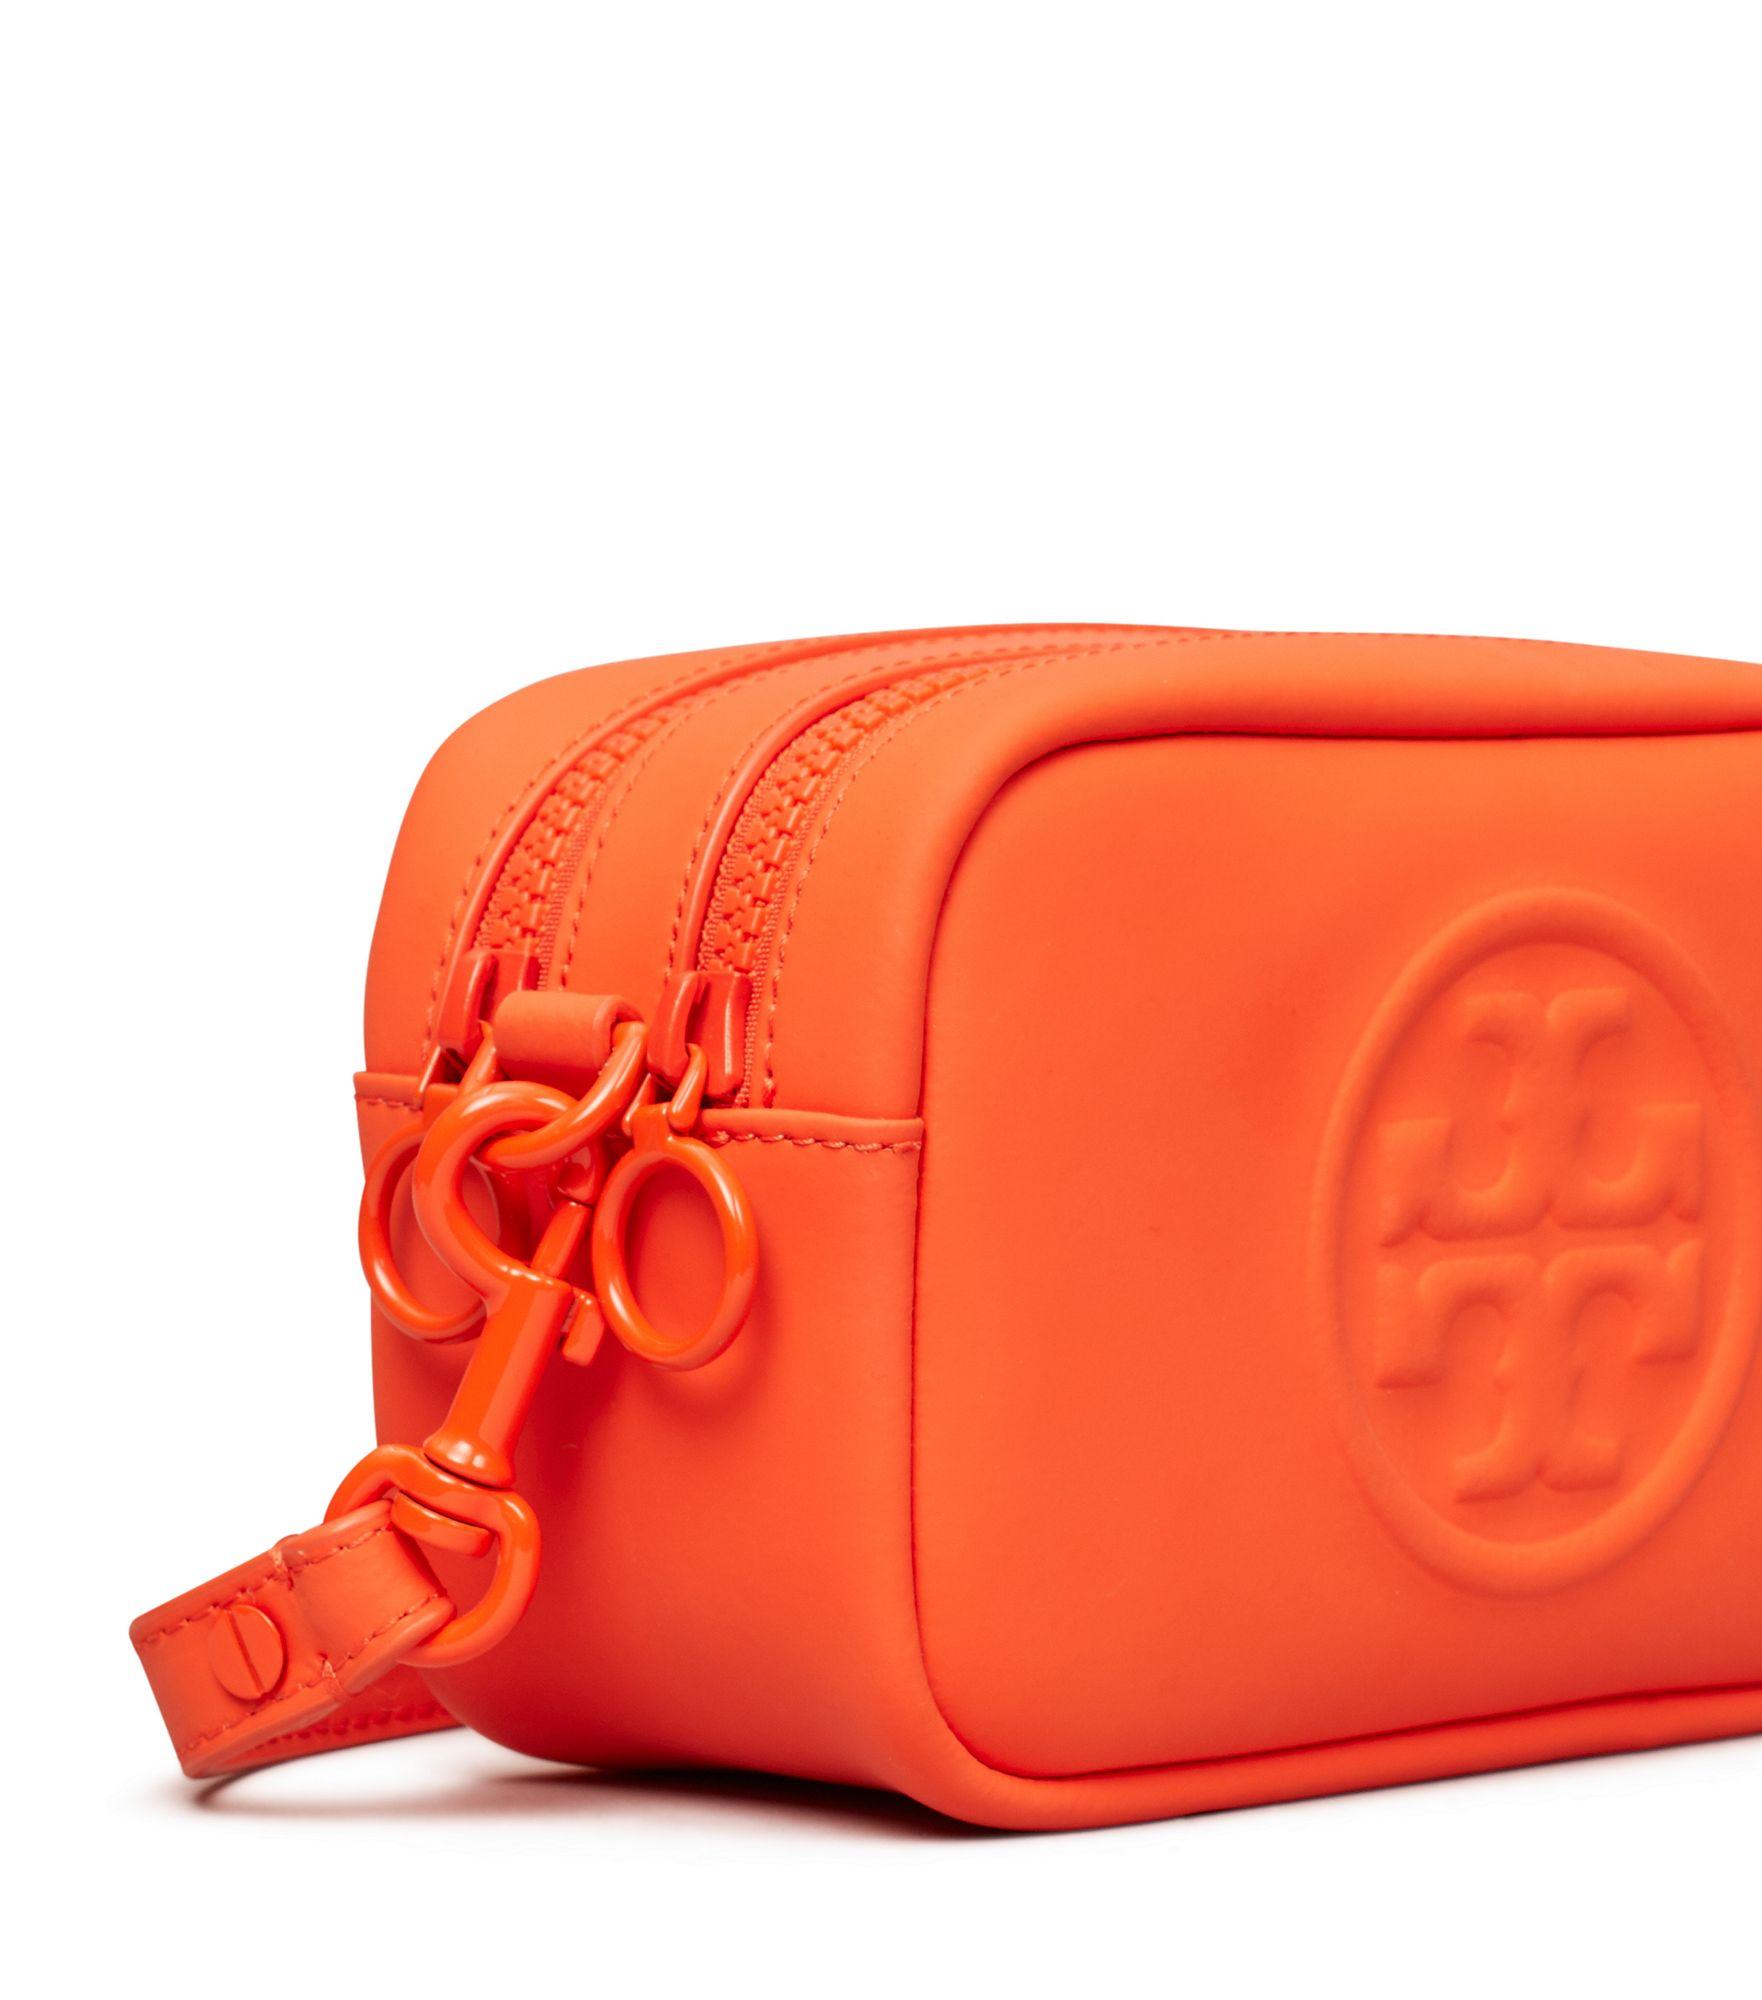 Tory Burch Leather Perry Bombe Matte Mini Bag in Orange - Lyst